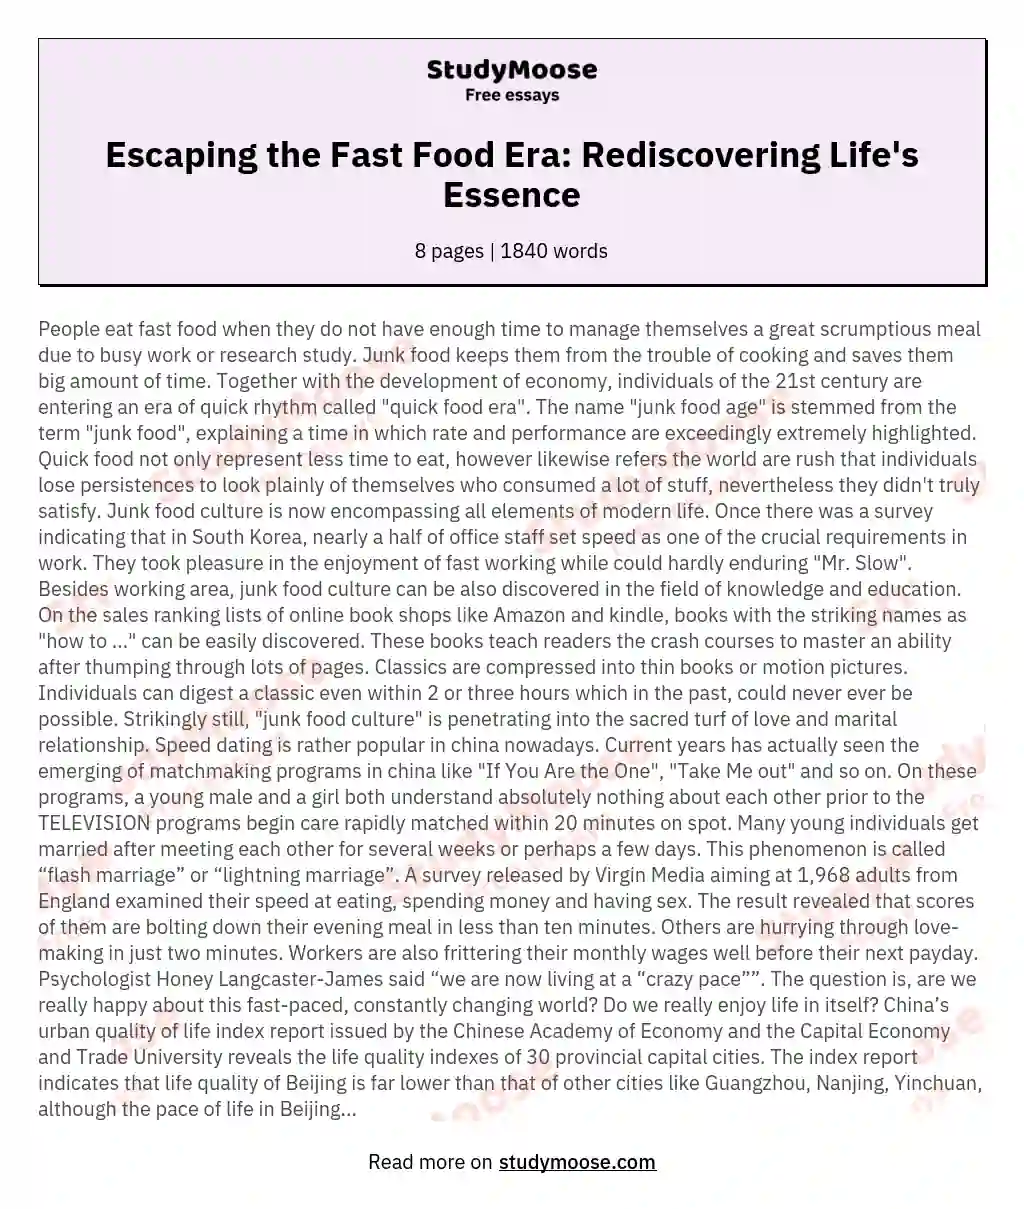 Escaping the Fast Food Era: Rediscovering Life's Essence essay